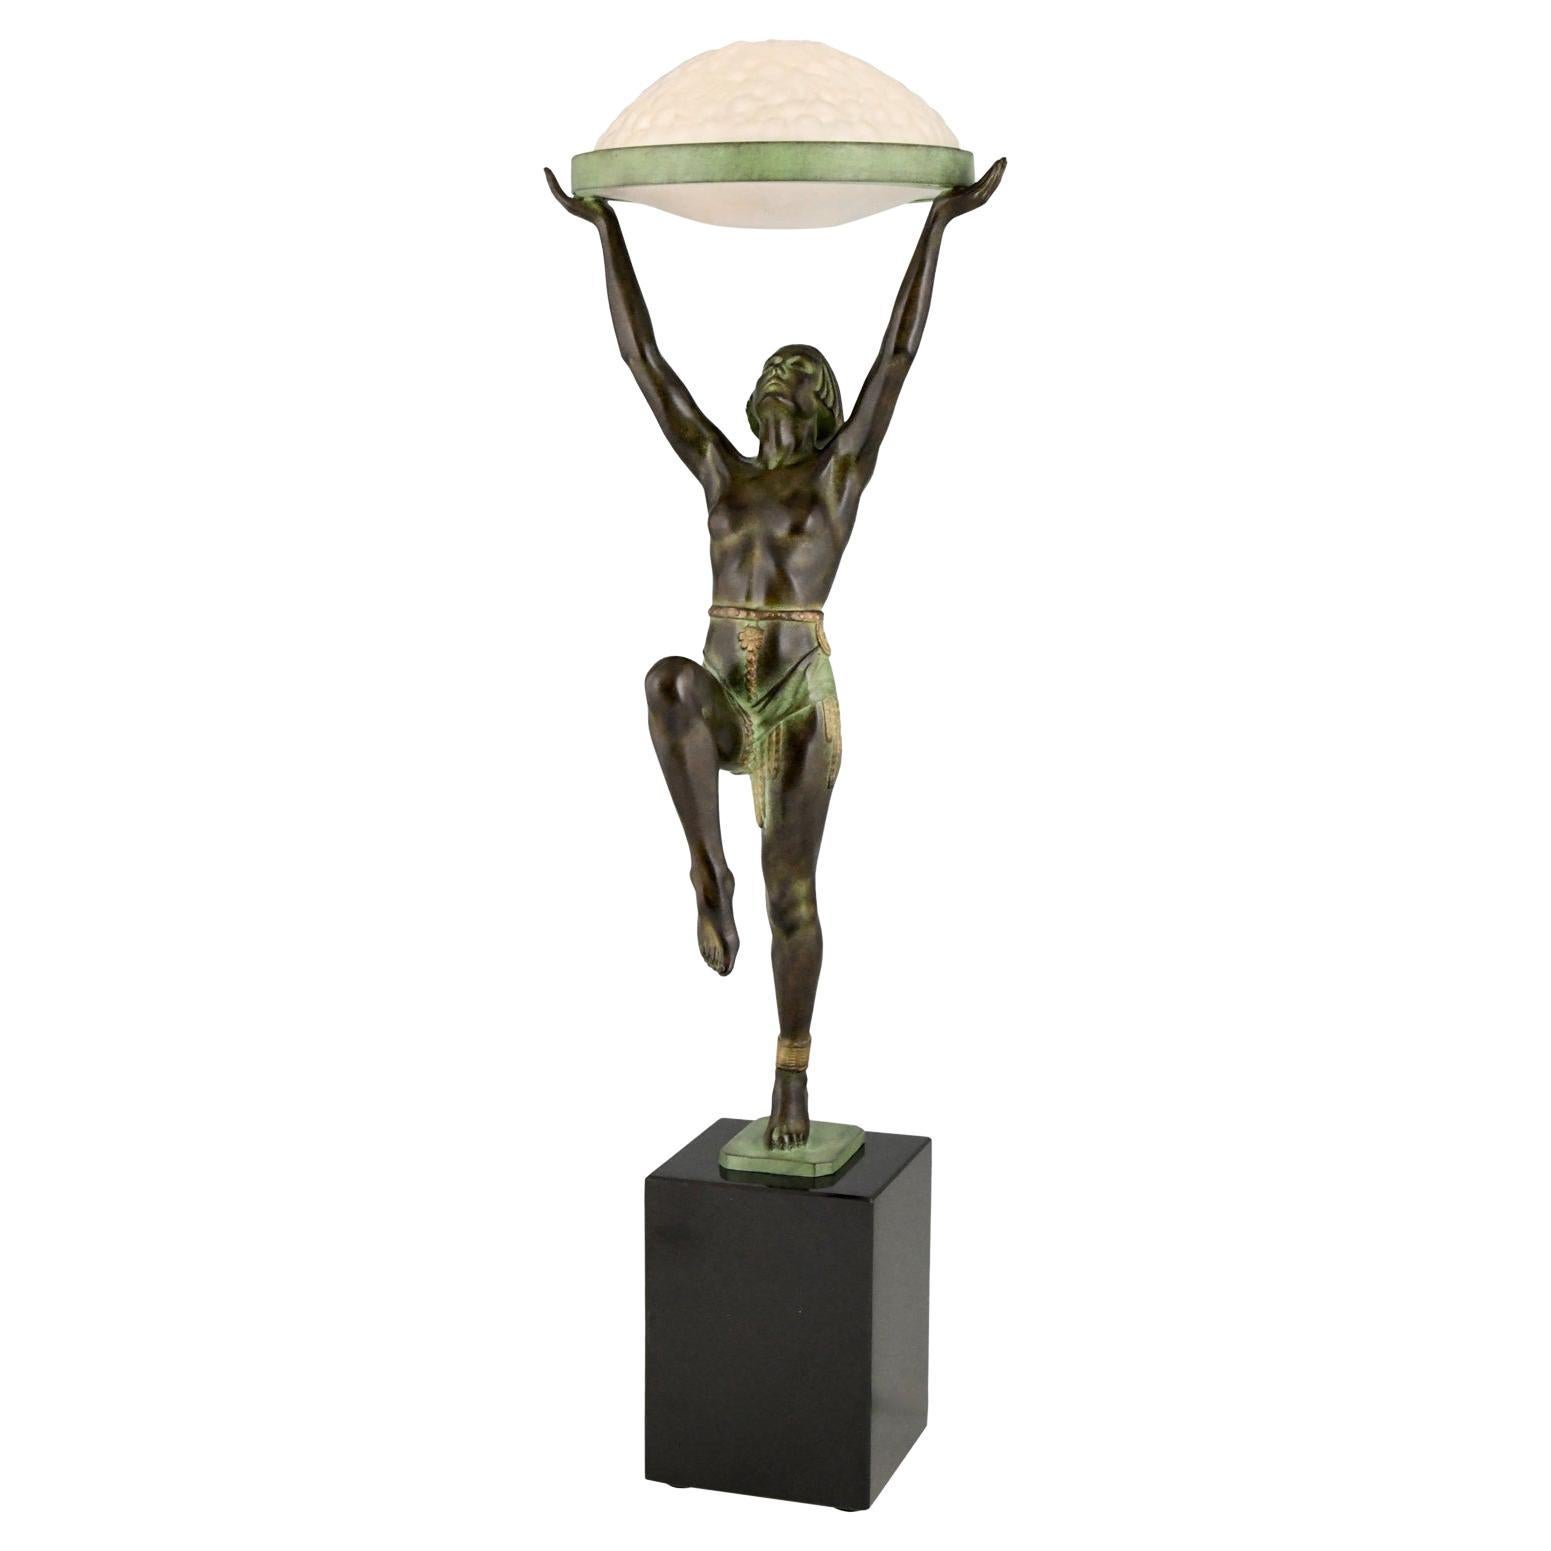 Art Deco Style Table Lamp of a Dancer Holding a Glass Shade Max Le Verrier